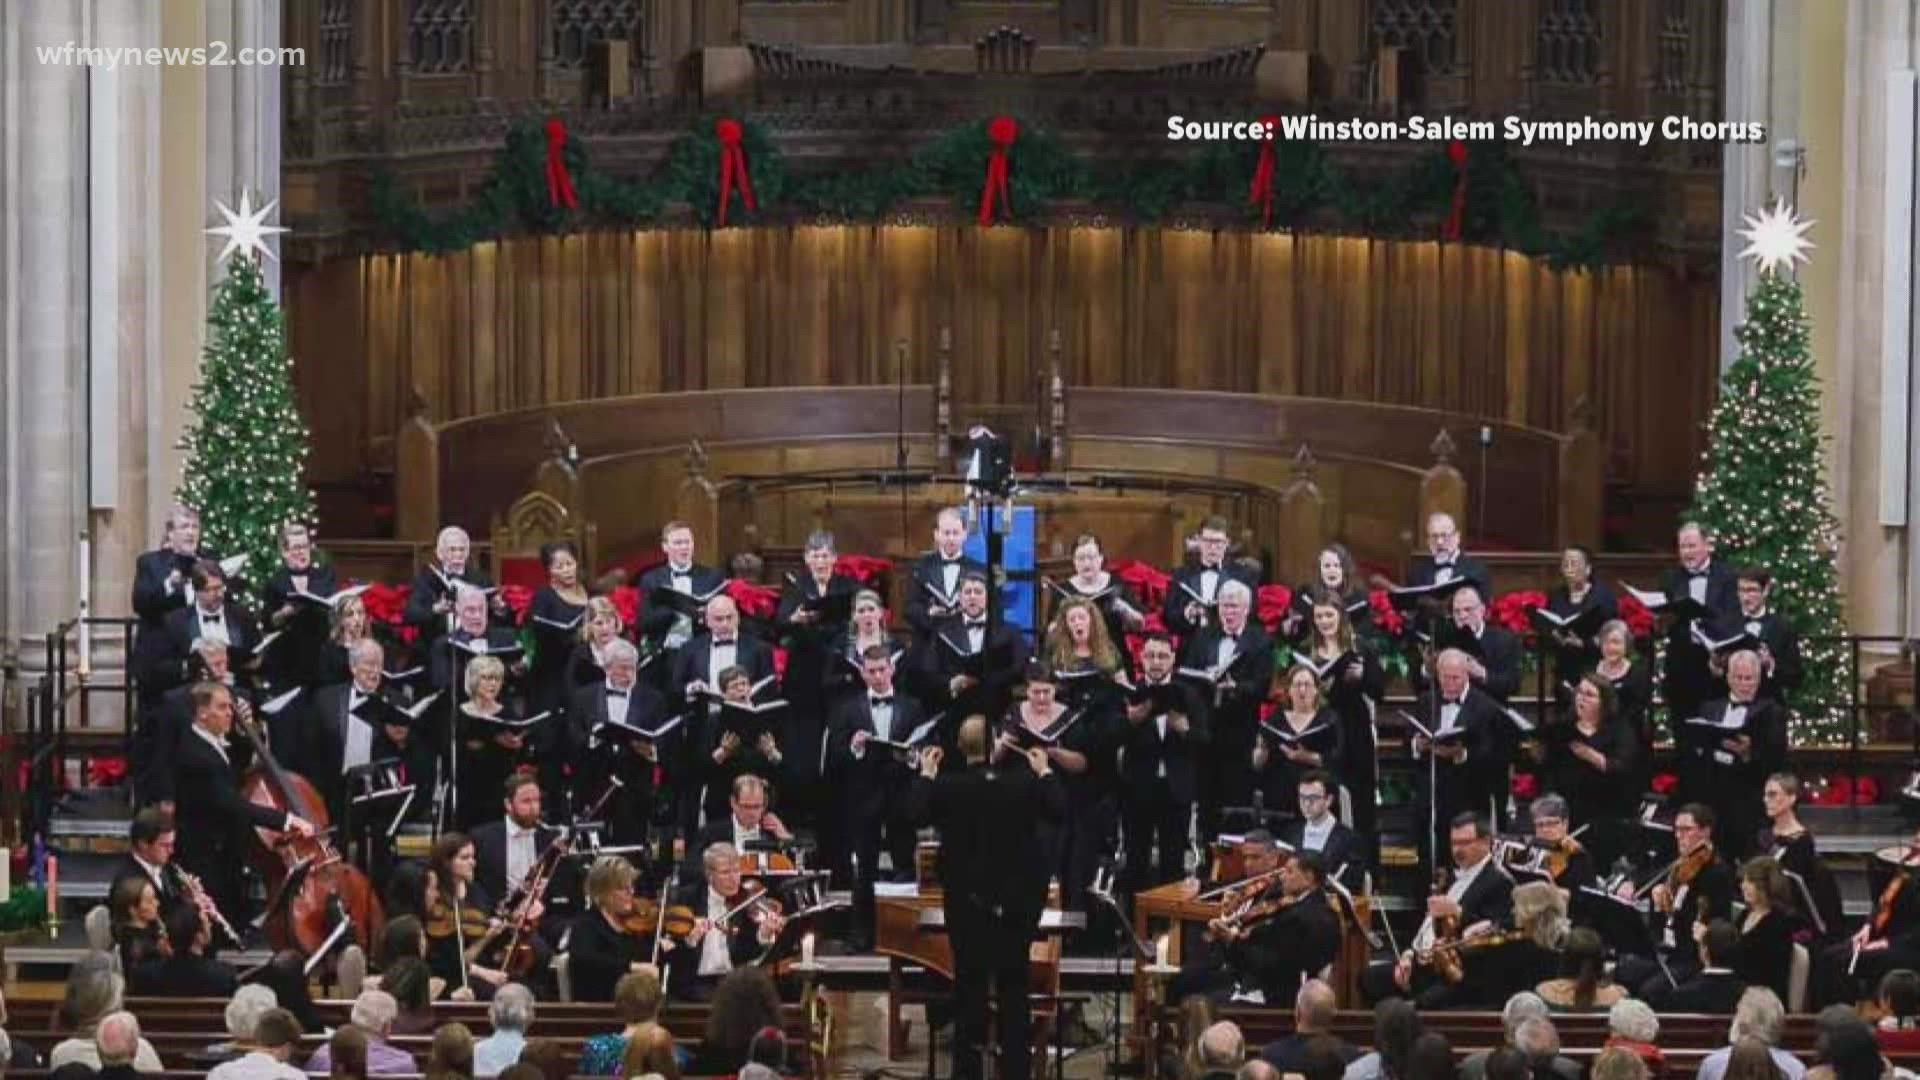 The Winston-Salem symphony will perform a holiday classic, Handel’s “Messiah.”